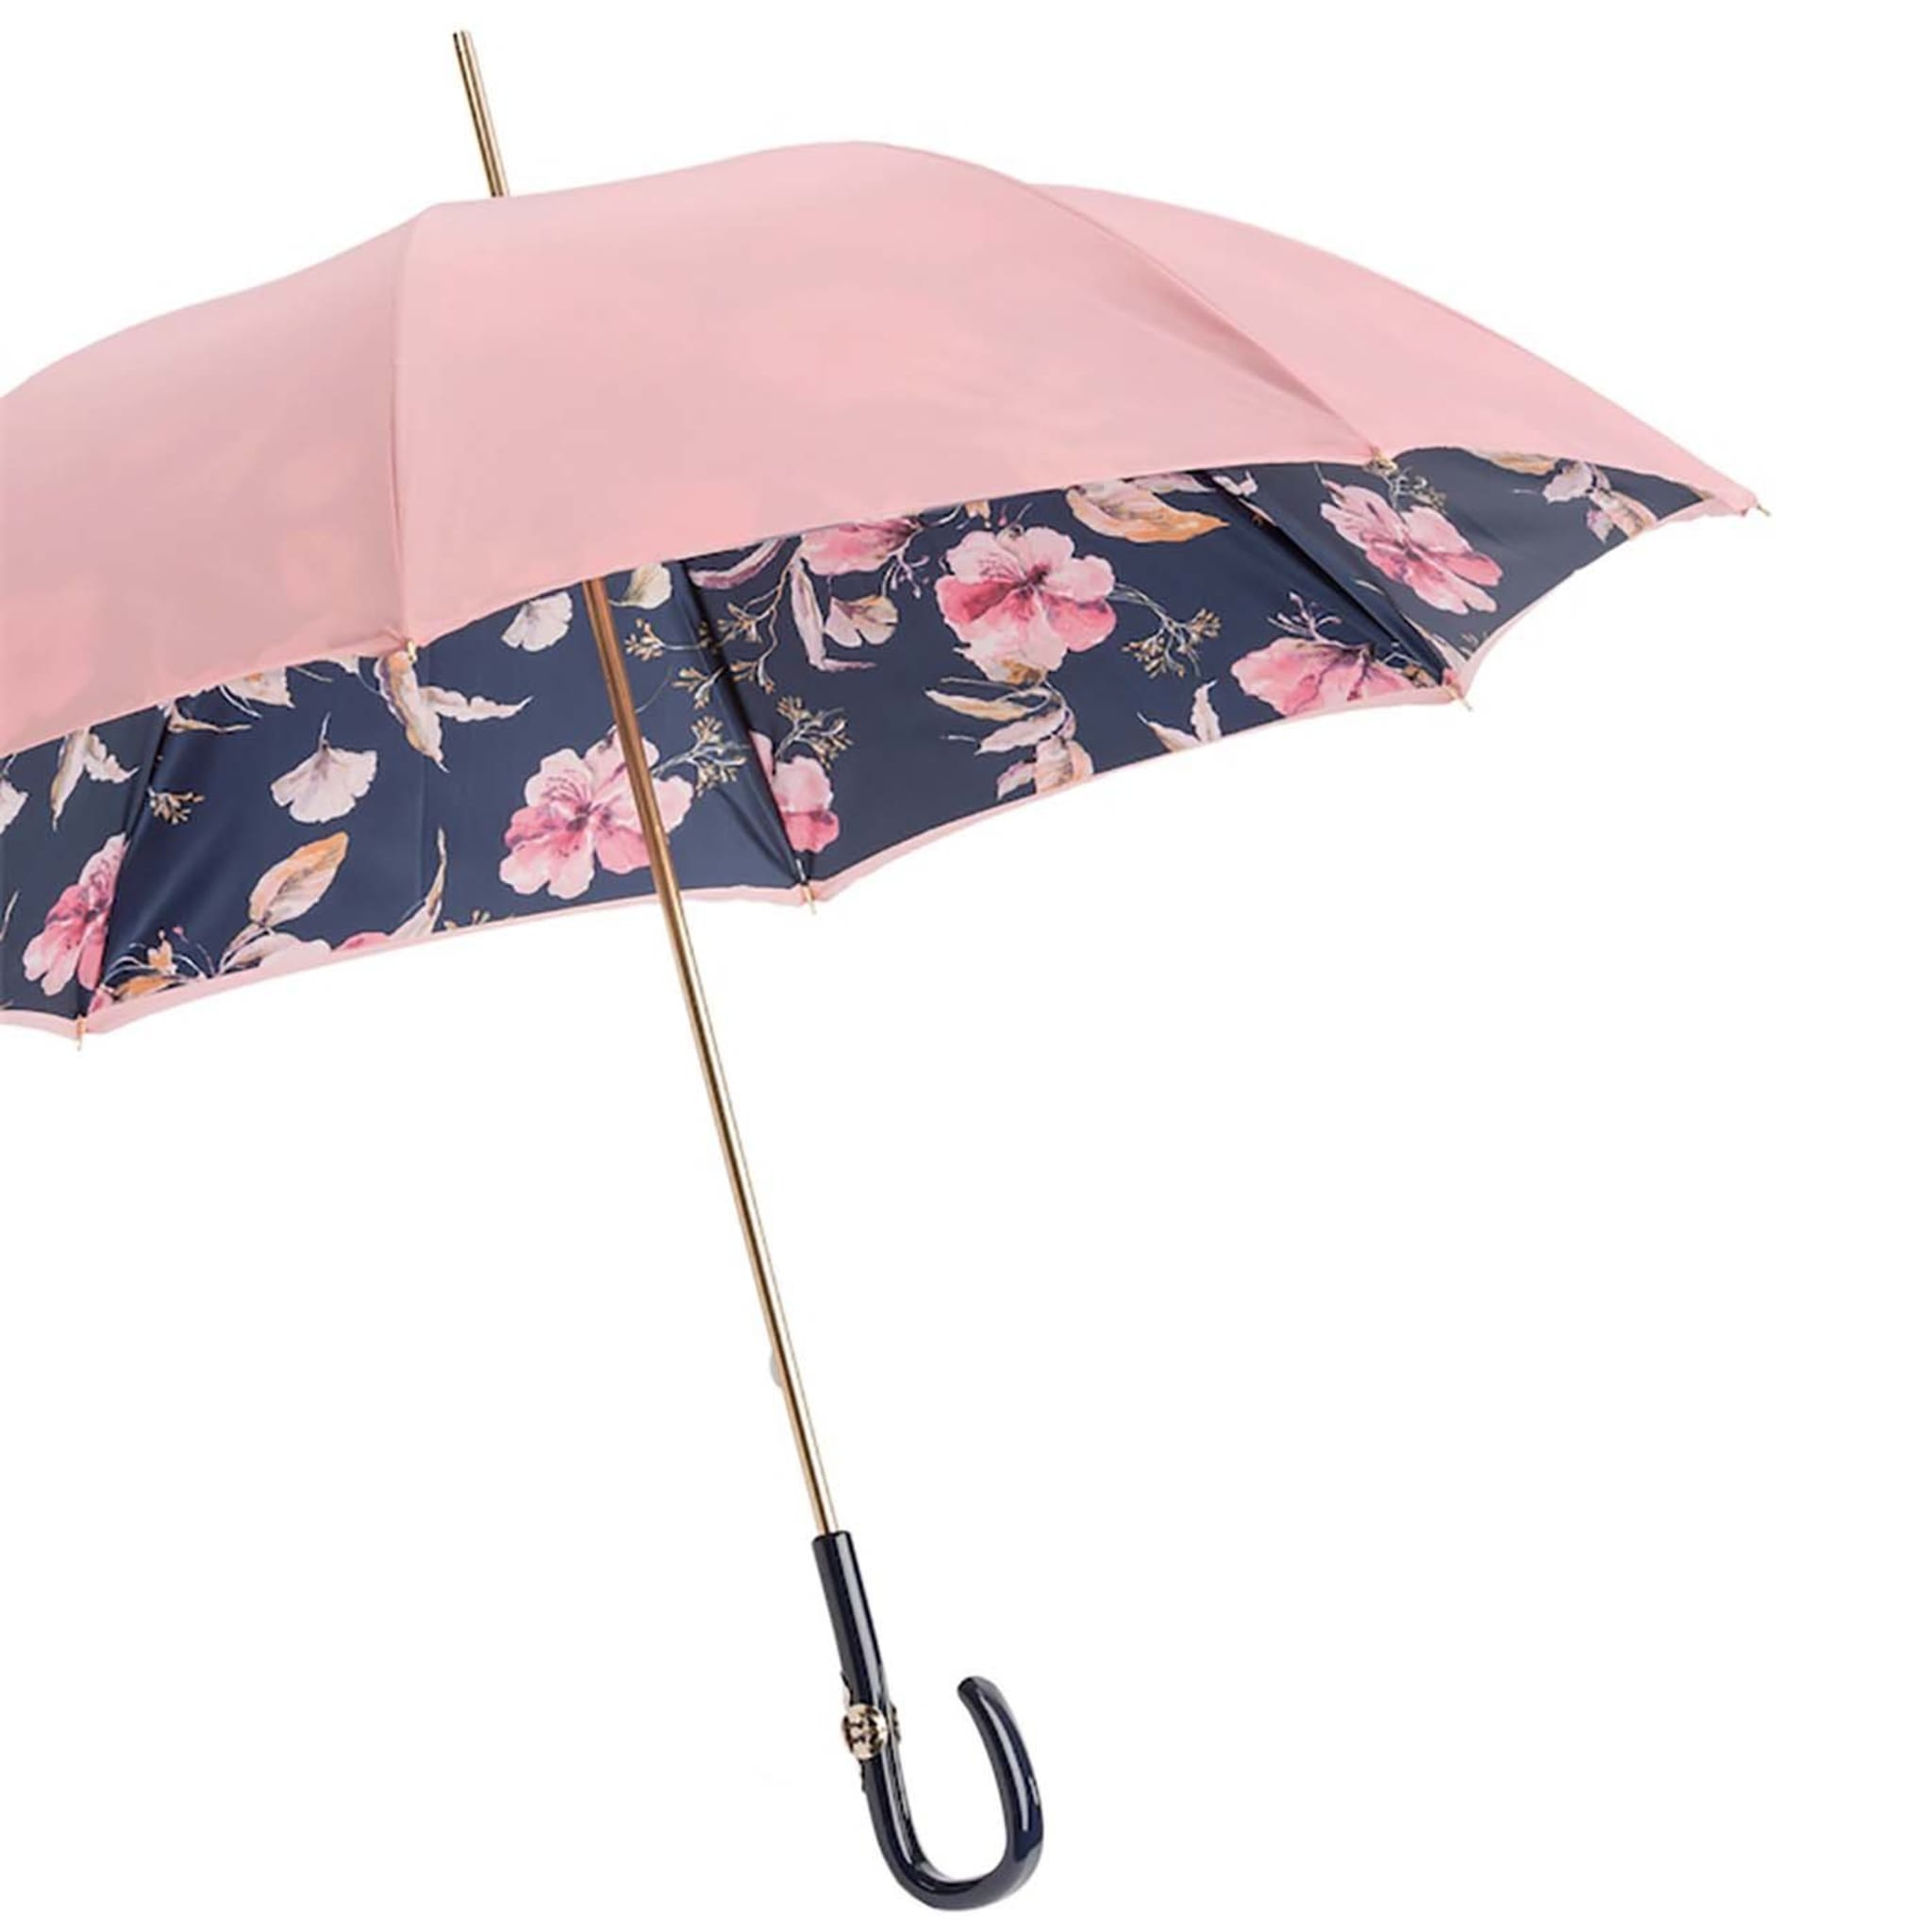 Pink Umbrella with Flowers - Alternative view 1